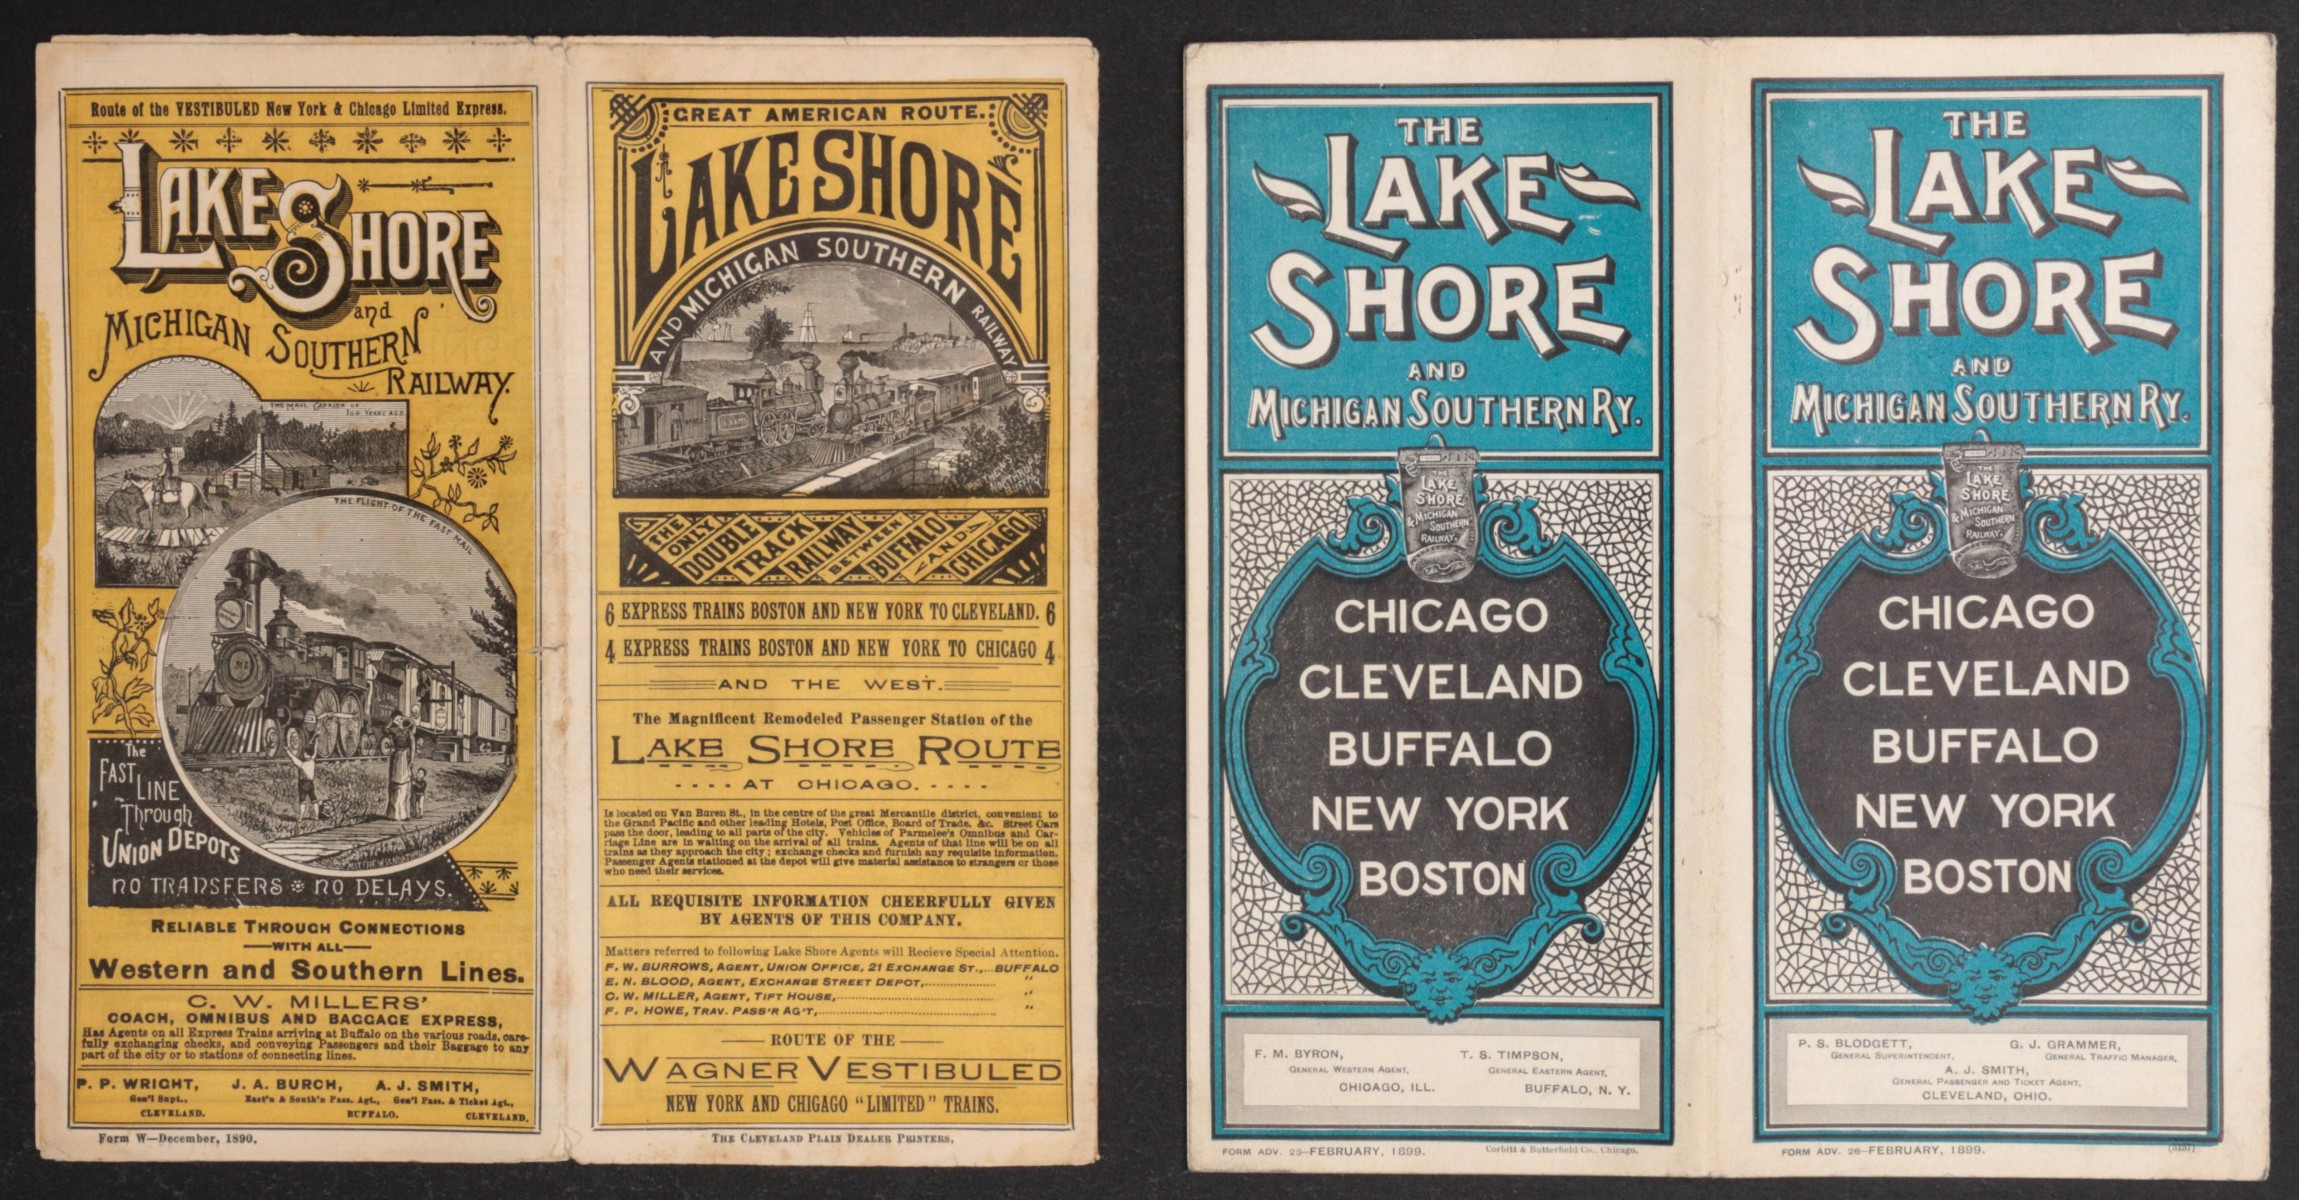 LAKE SHORE & MICHIGAN S. RY. TIMETABLES FOR 1890 & 1899